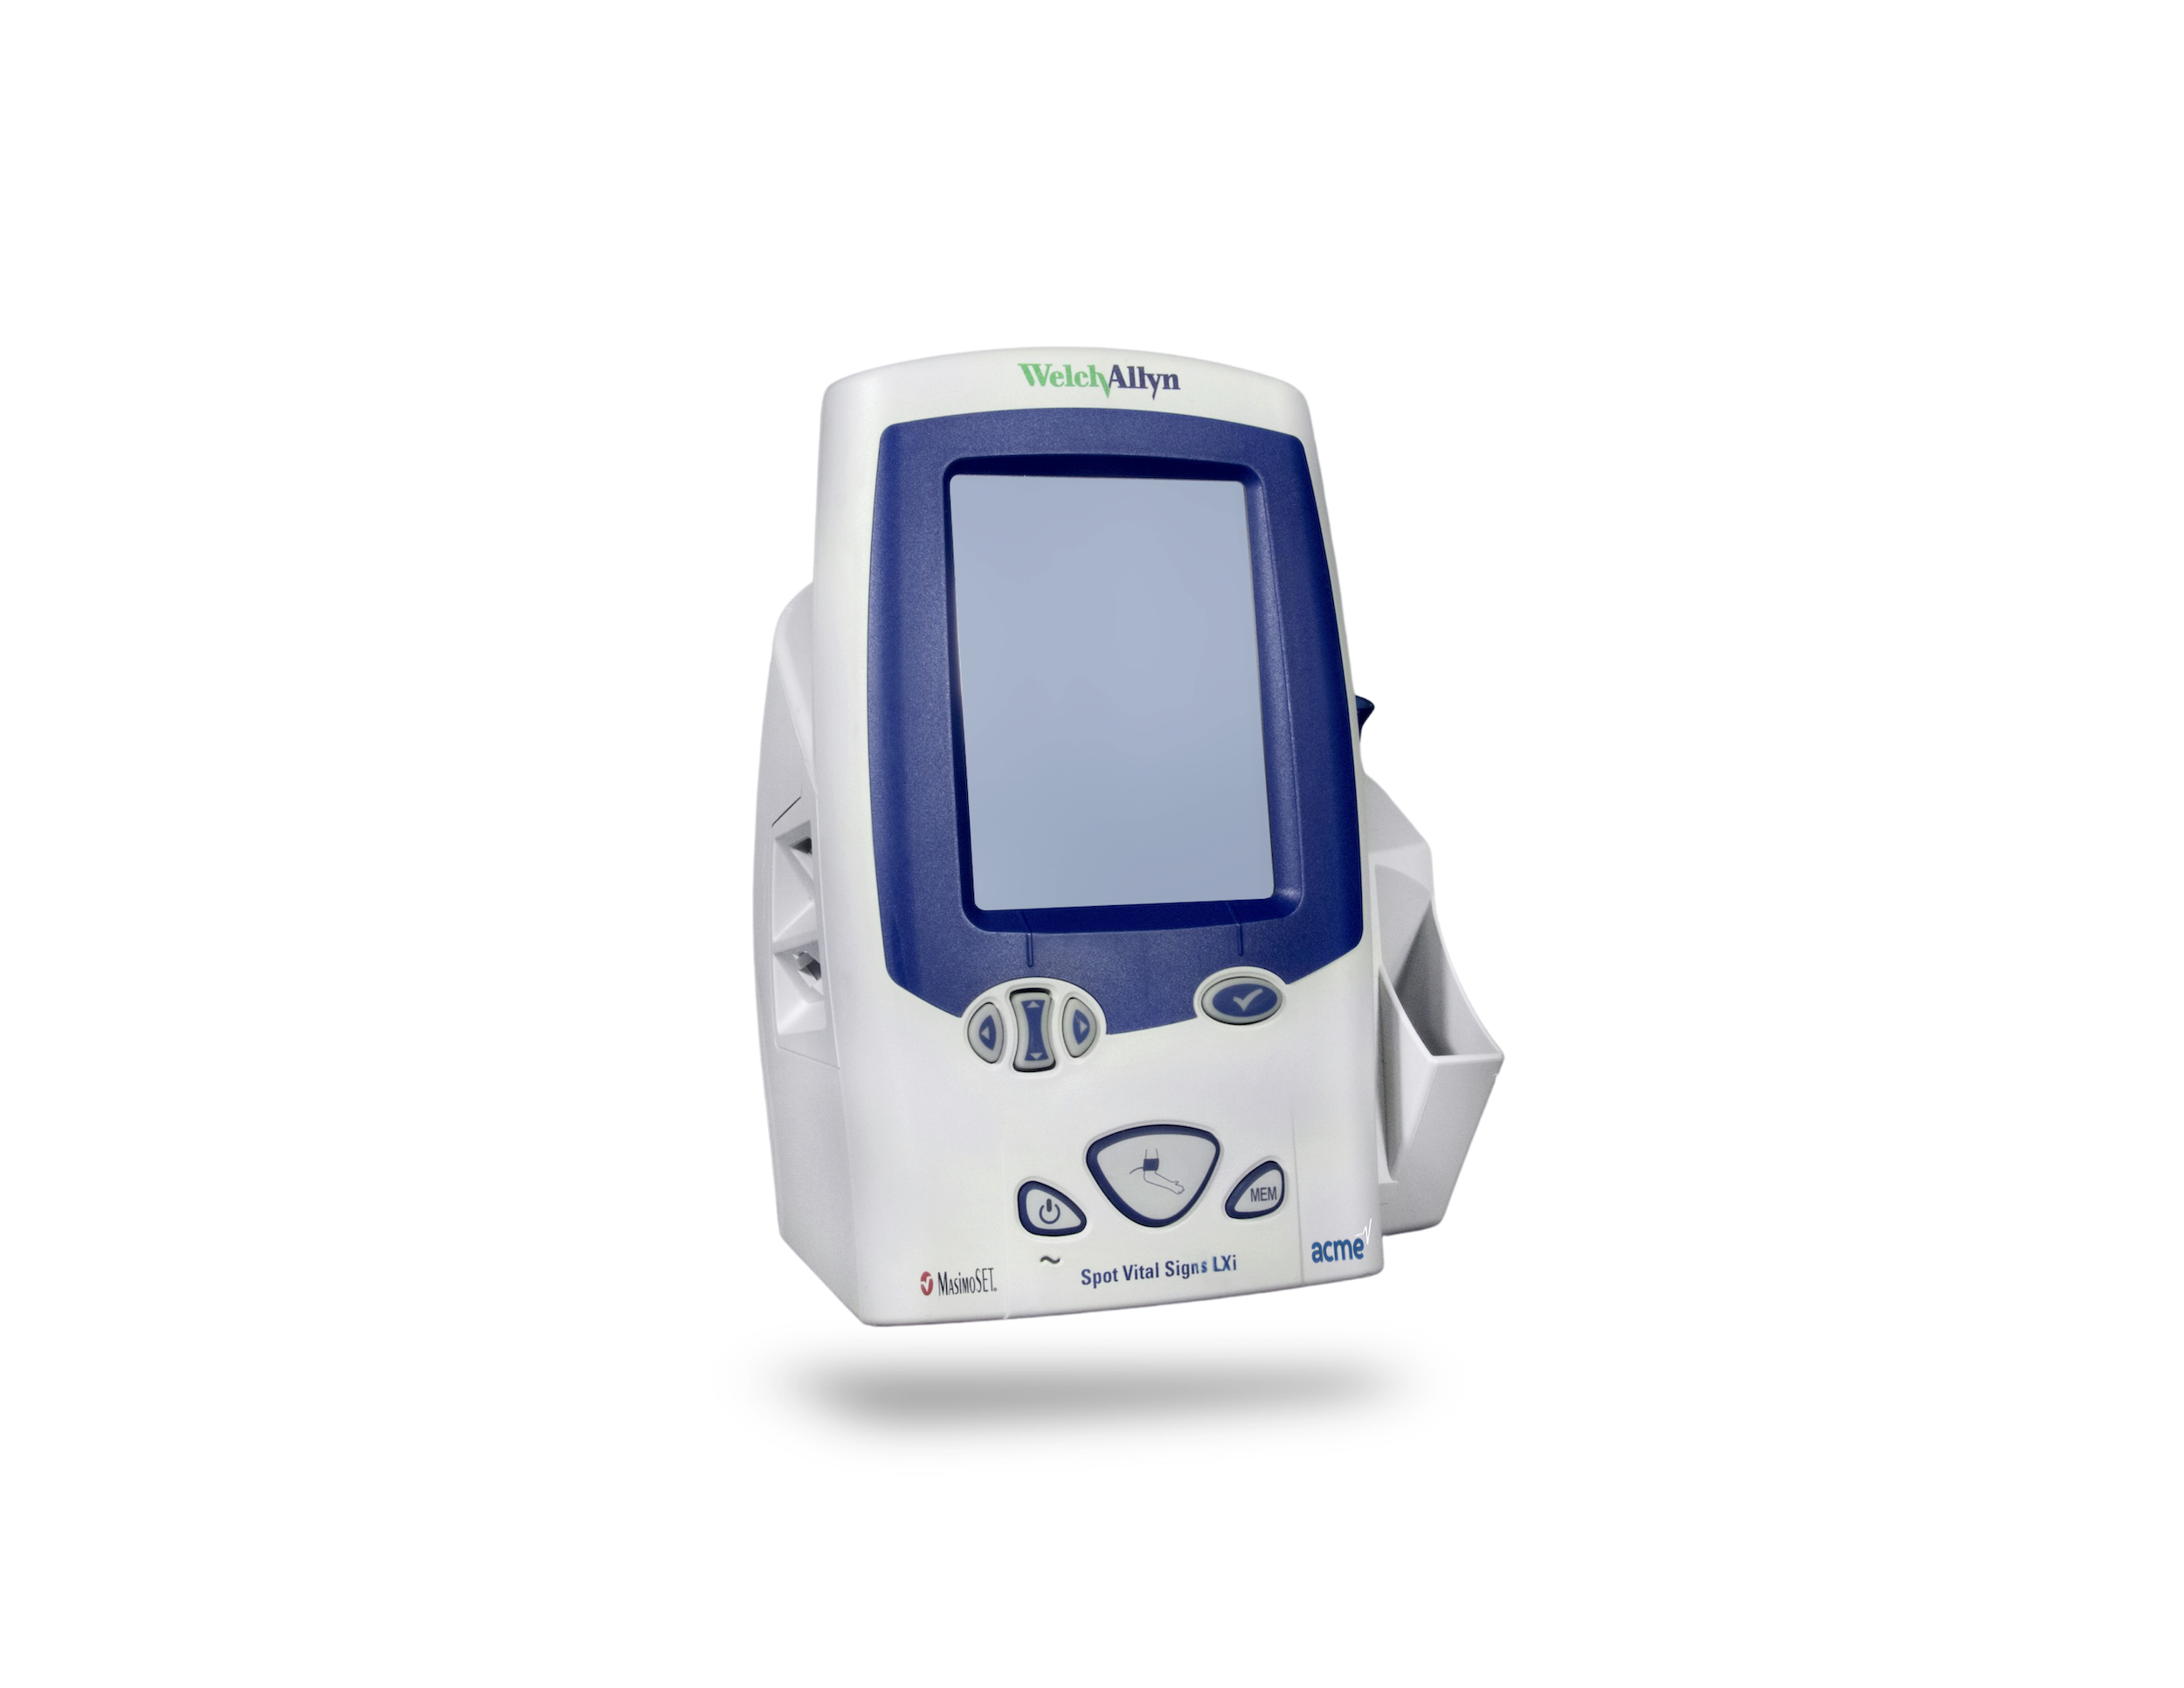 welch allyn spot vital signs lxi software